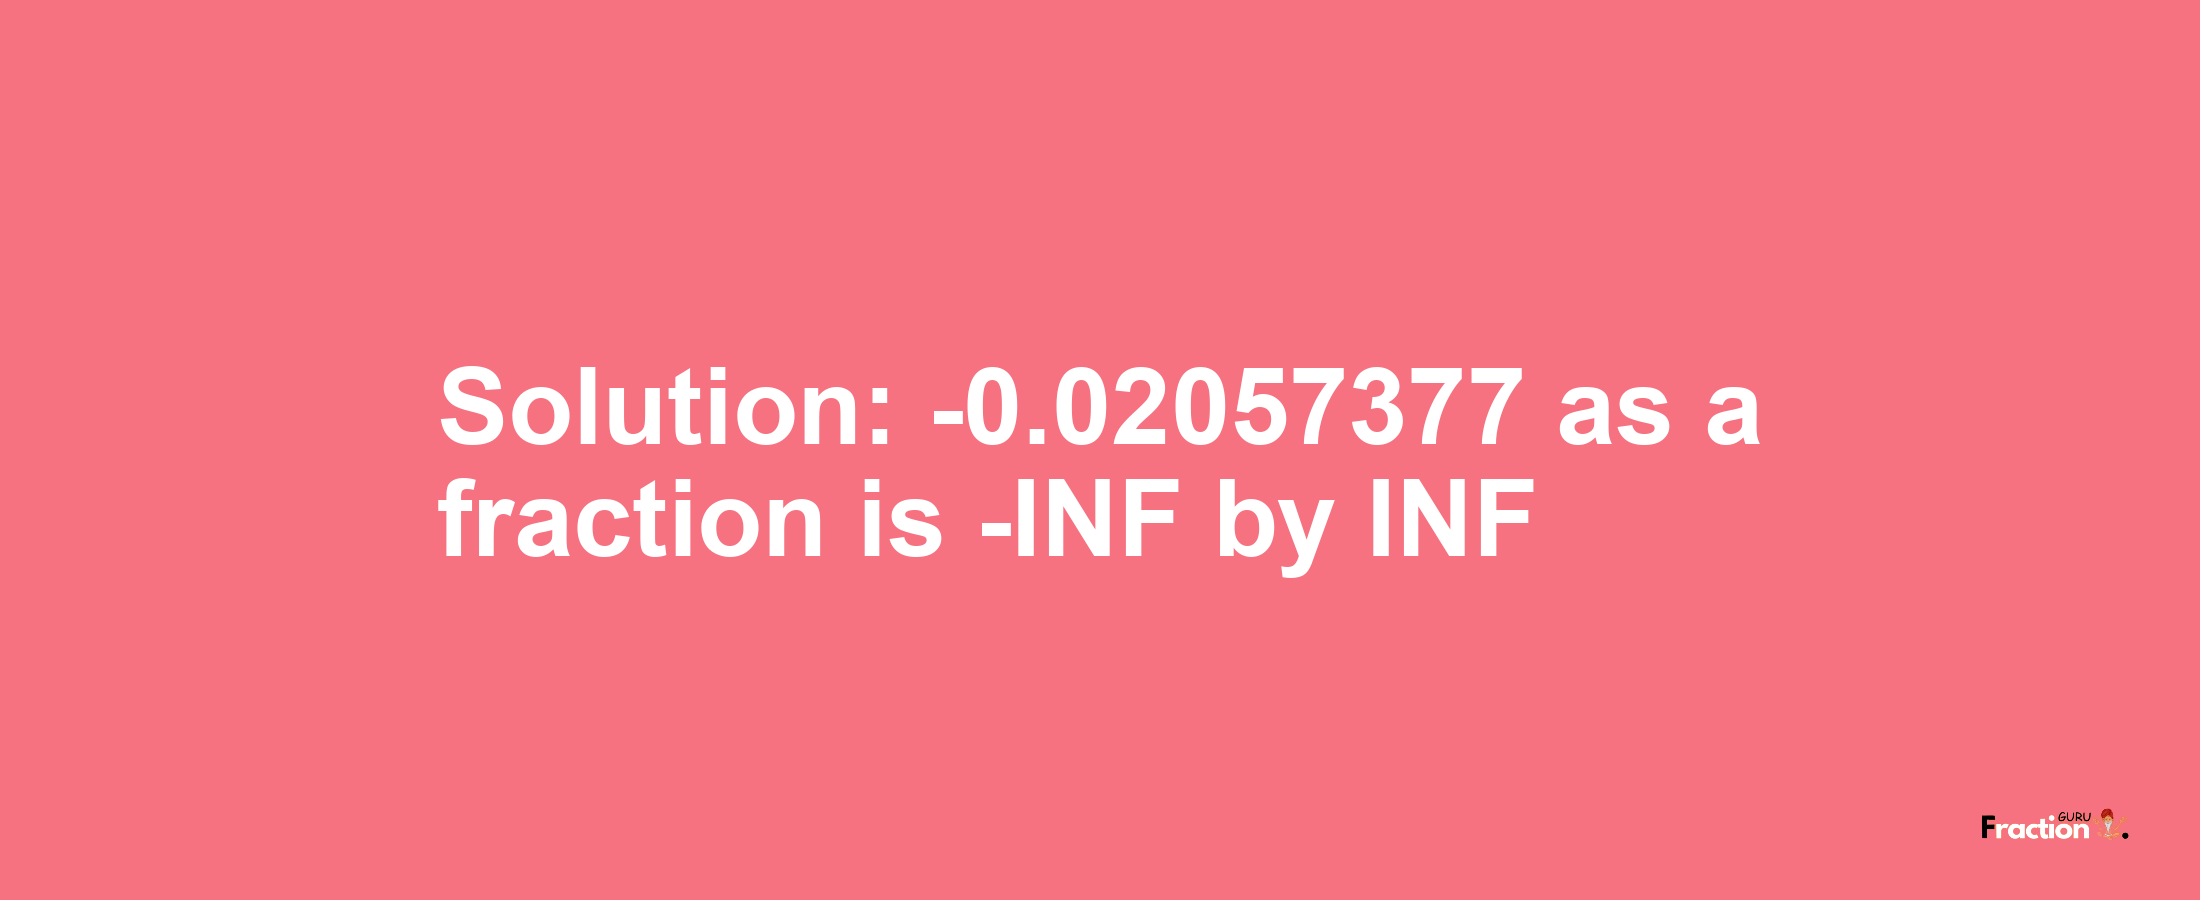 Solution:-0.02057377 as a fraction is -INF/INF